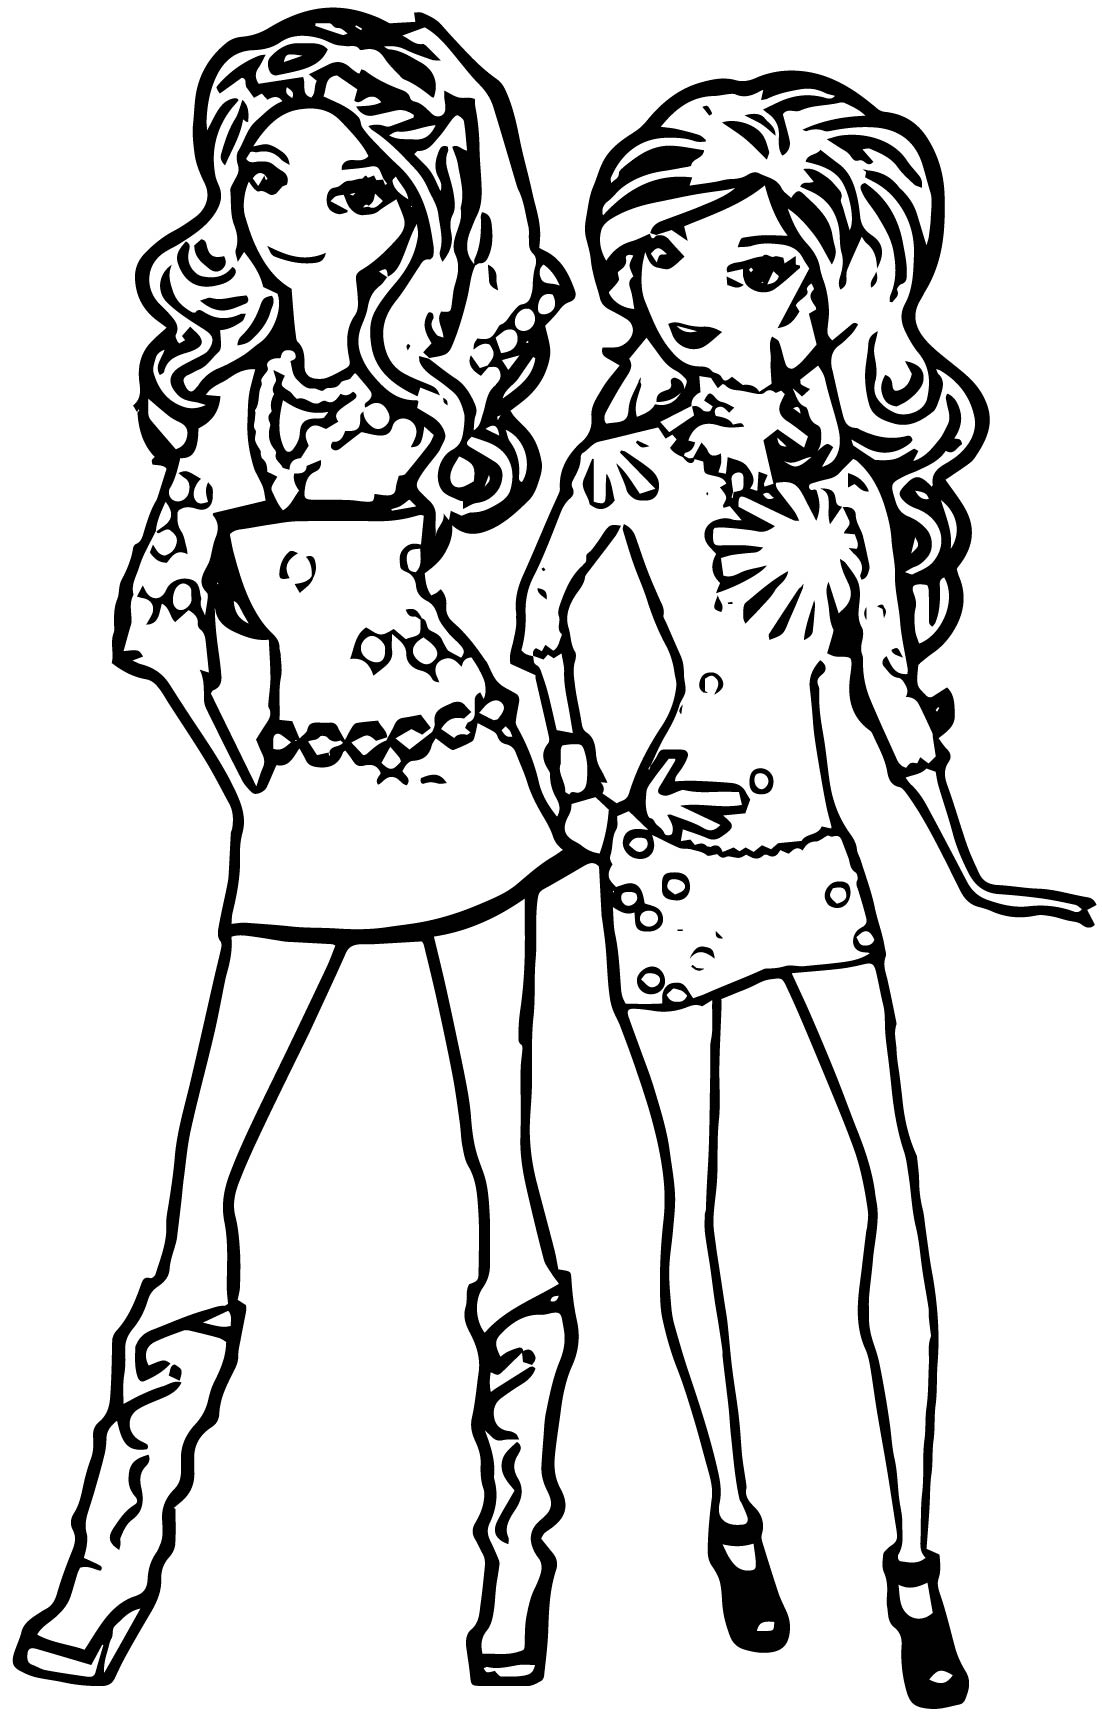 Two Best Friends Coloring Pages at GetColorings.com | Free printable ...